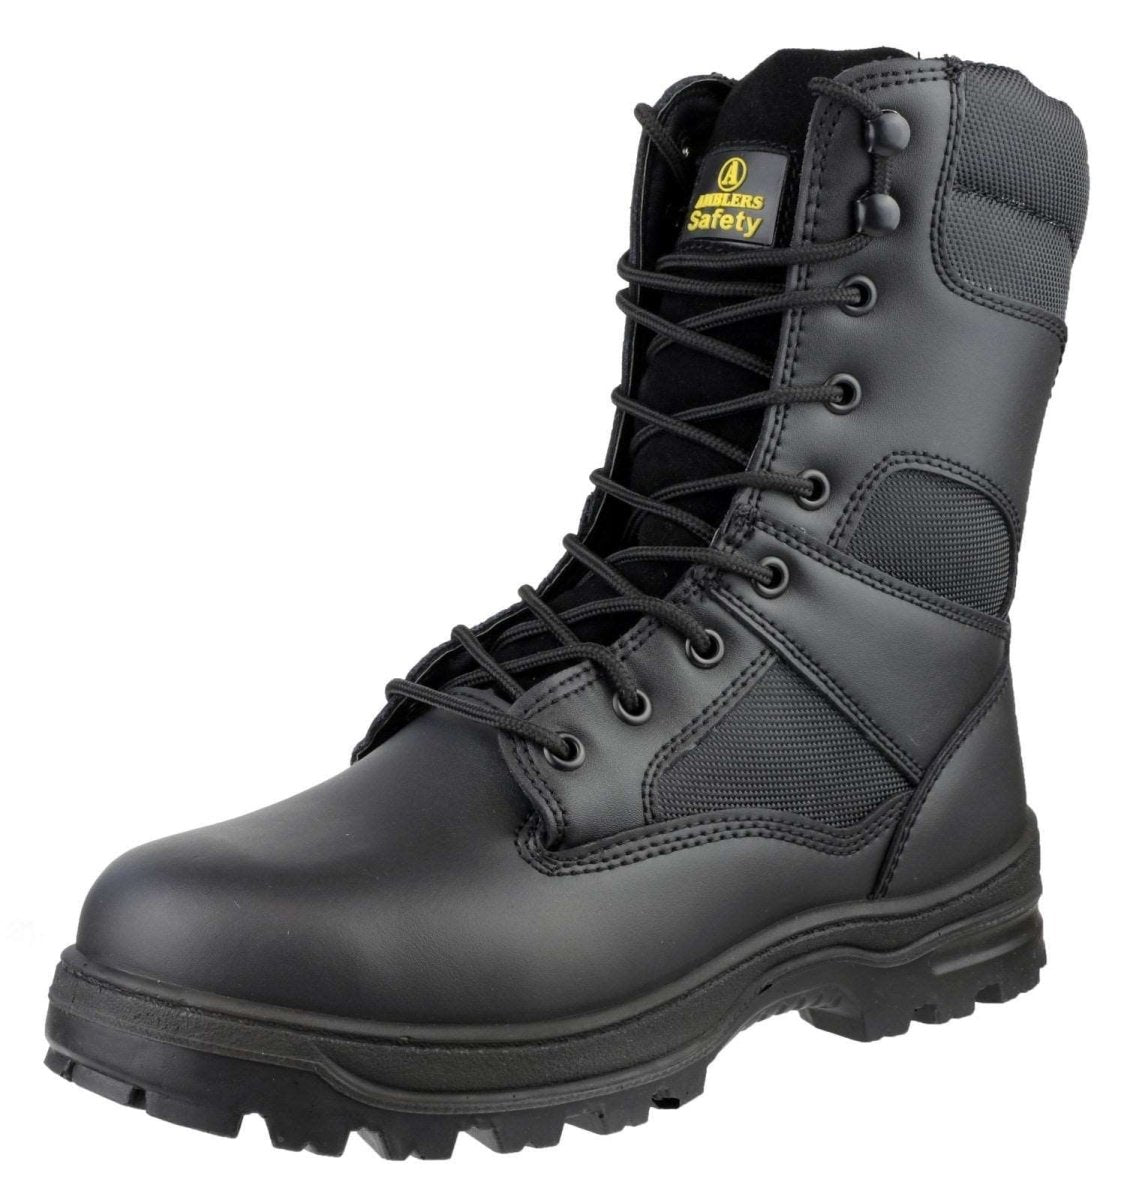 Amblers FS008 Water Resistant Hi-Leg Safety Boots - Shoe Store Direct